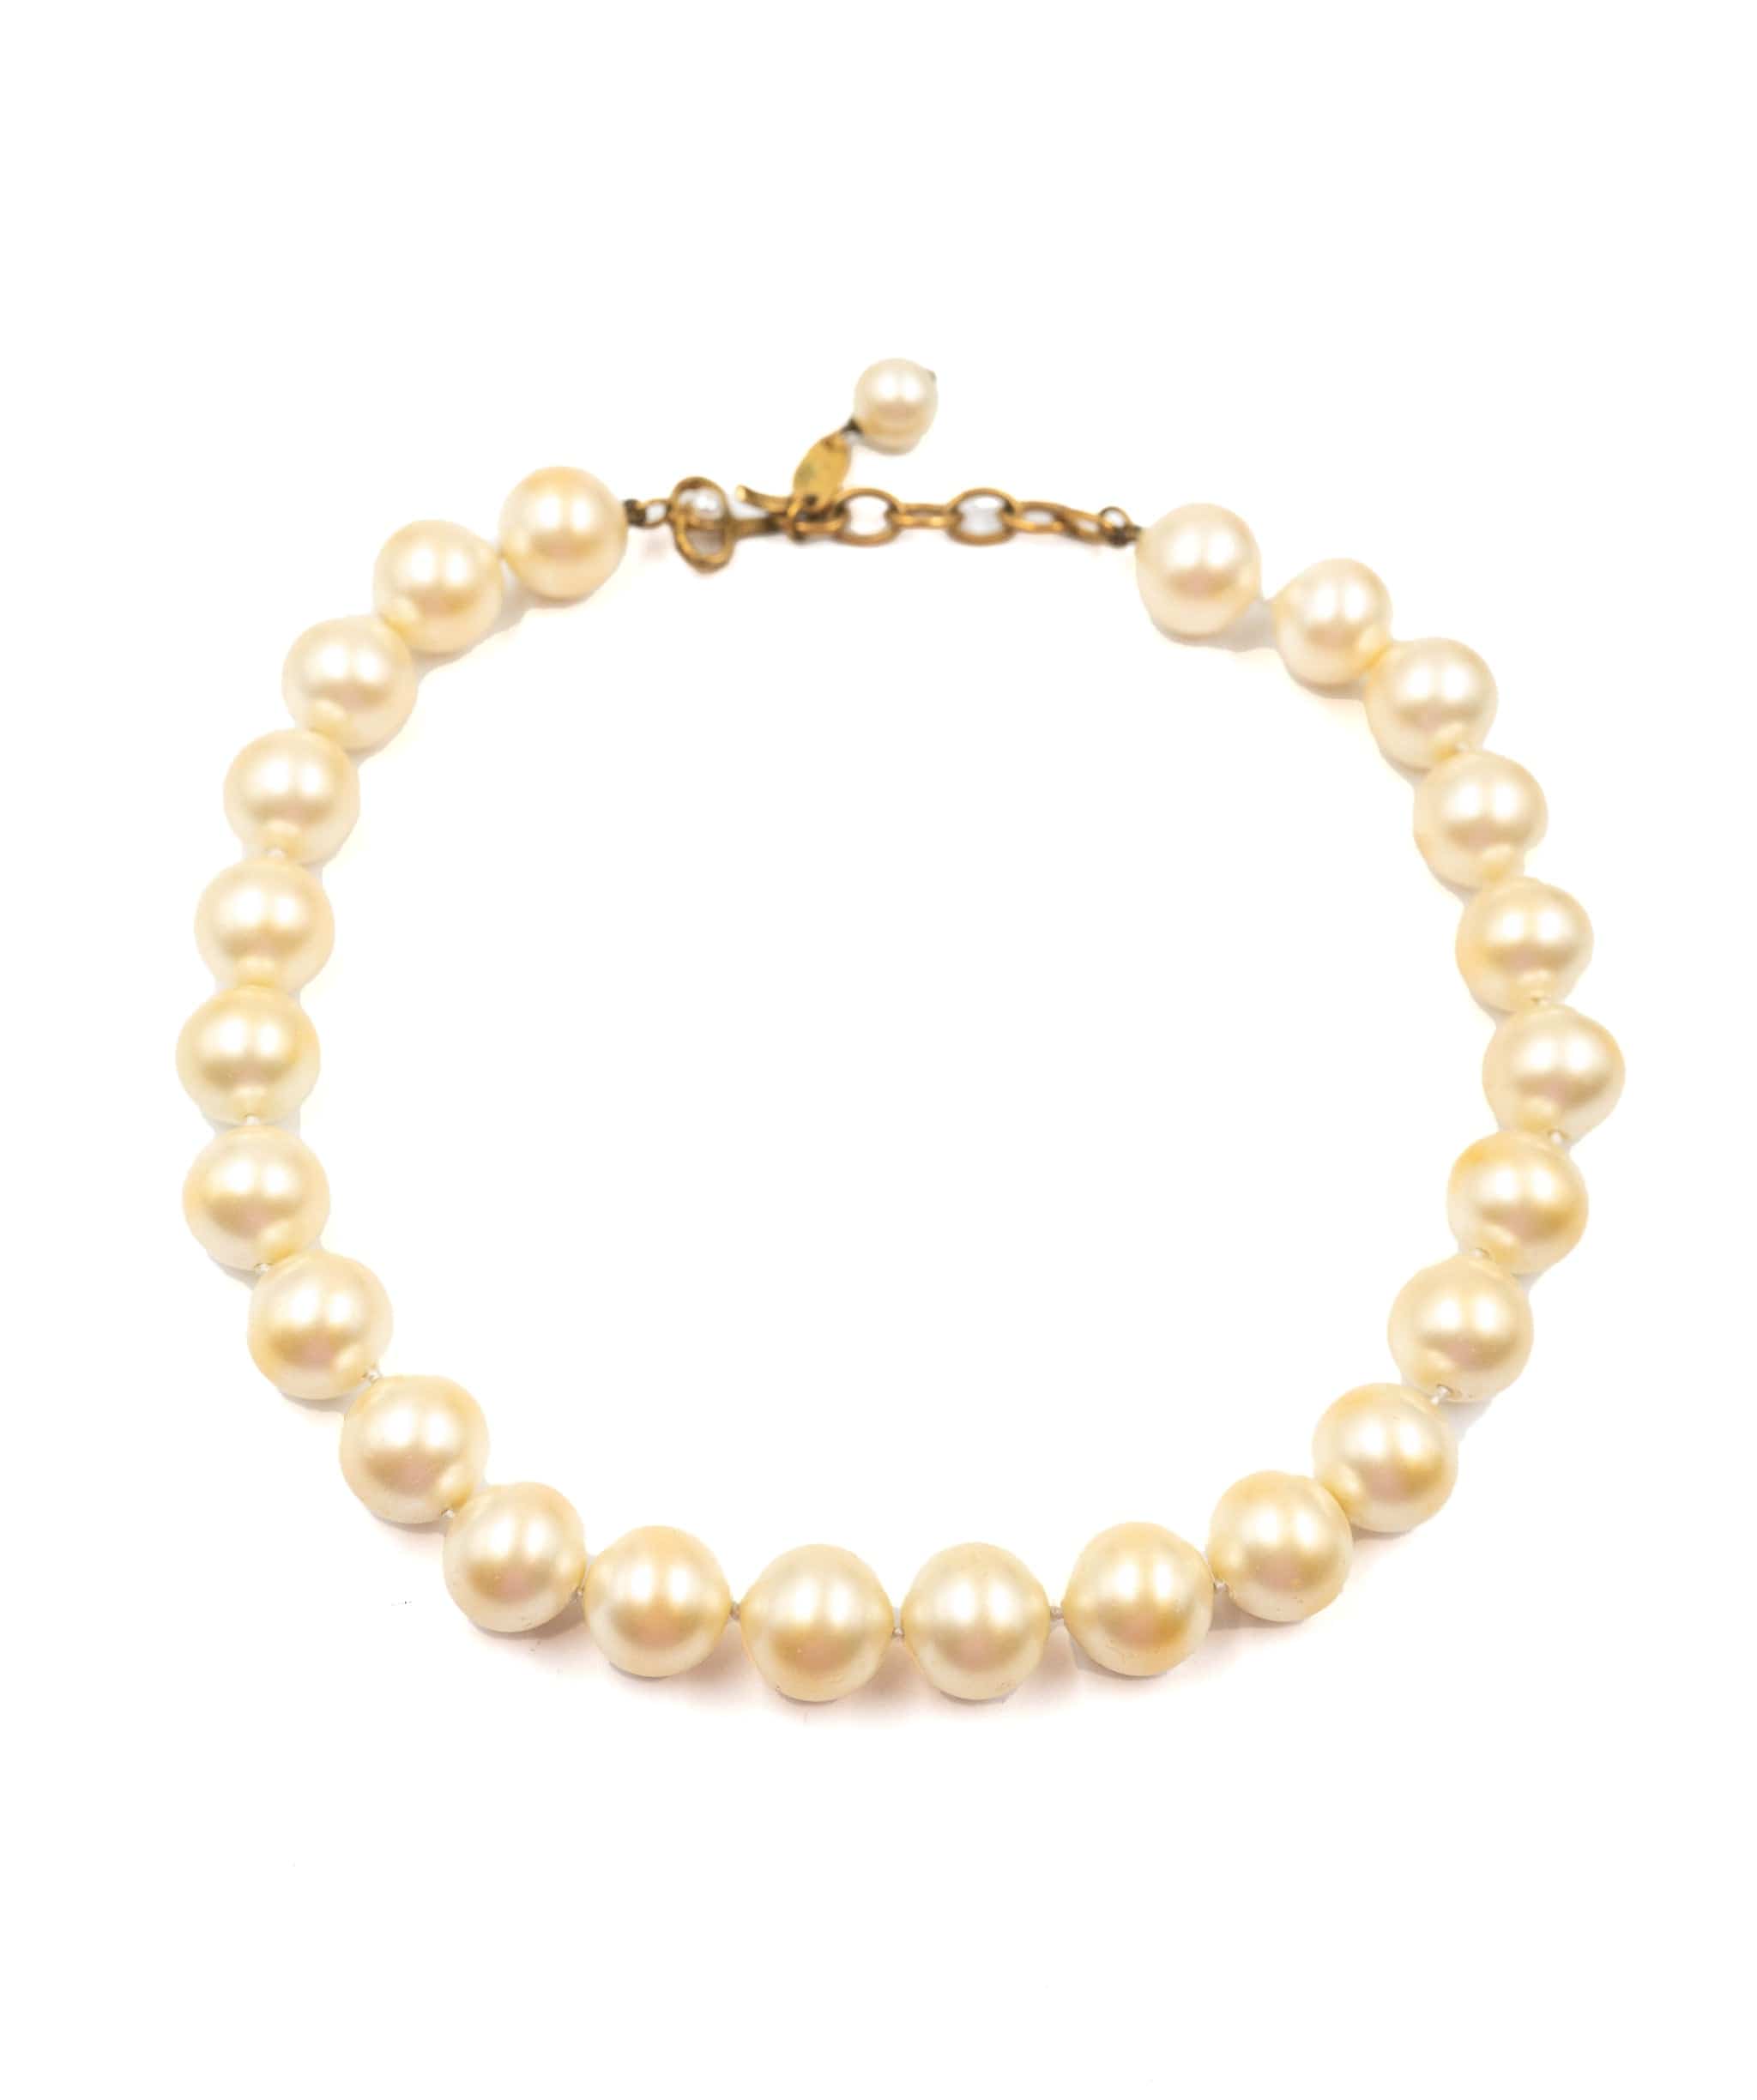 Chanel Chanel 1983 Pearl Necklace - AGL1663